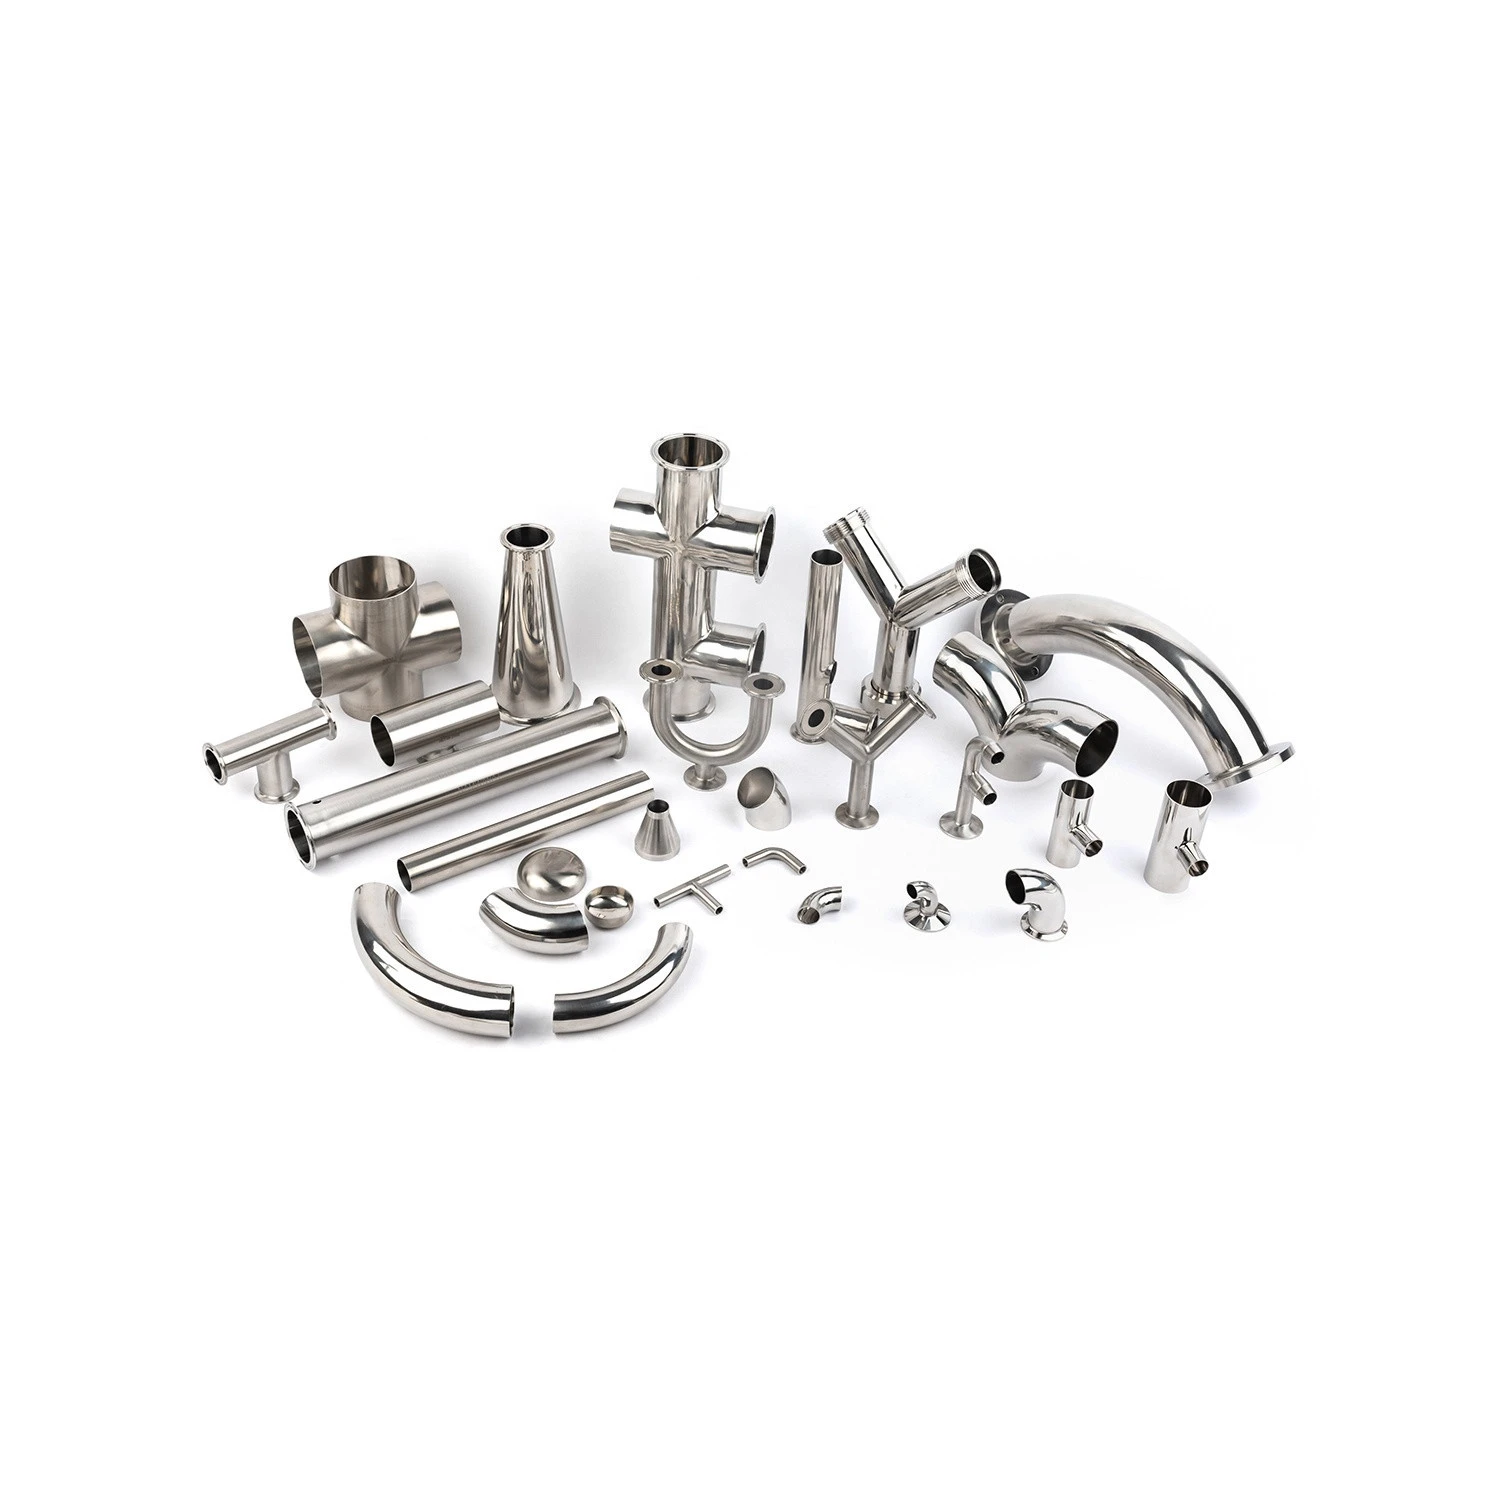 LONGVA Sanitary Stainless Steel Pipe Fittings and Valves